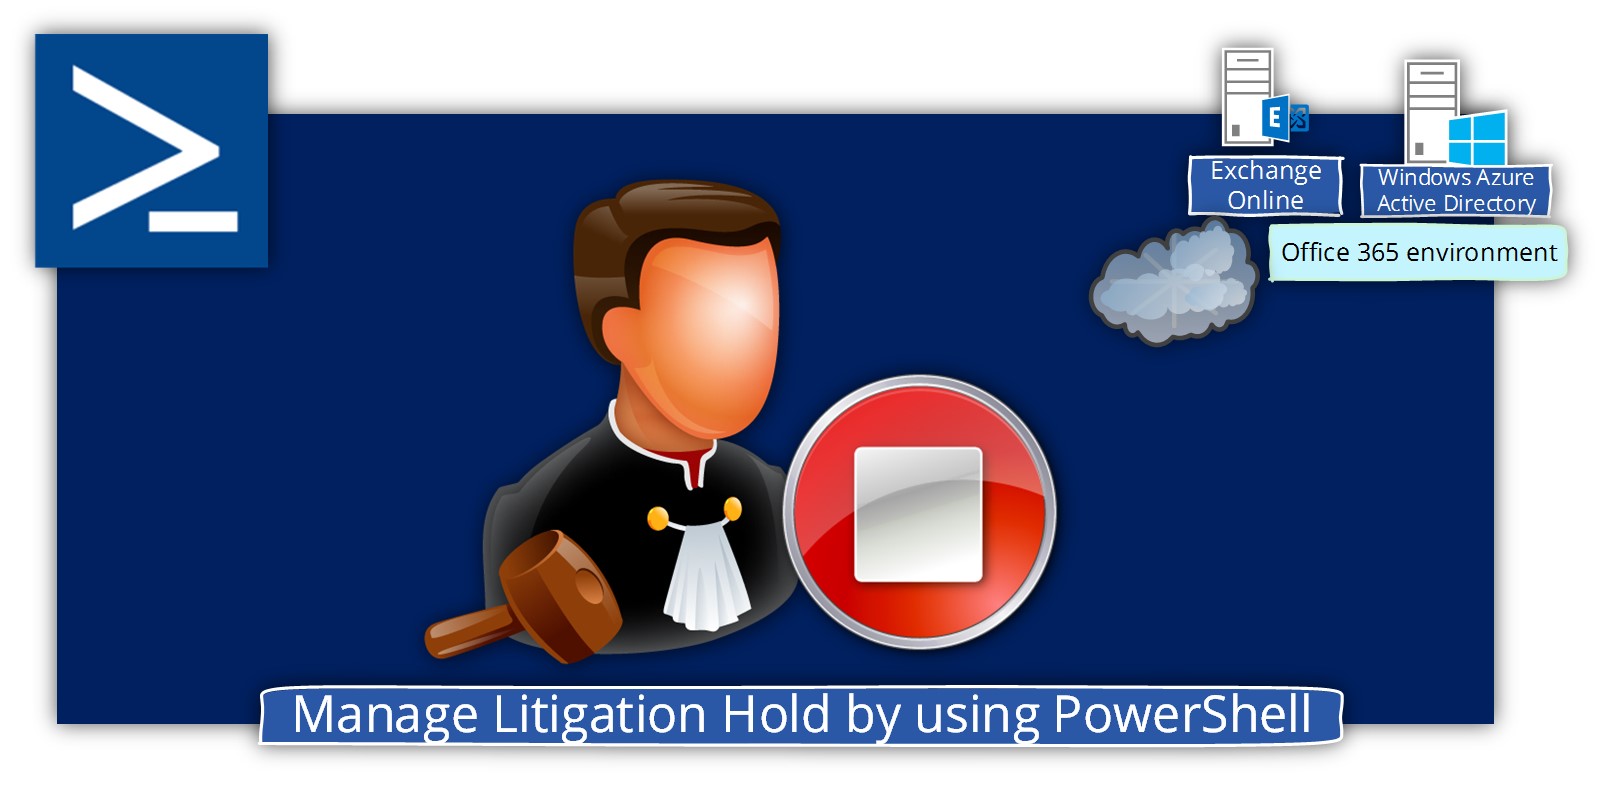 Manage Litigation Hold by using PowerShell | Office 365 - o365info